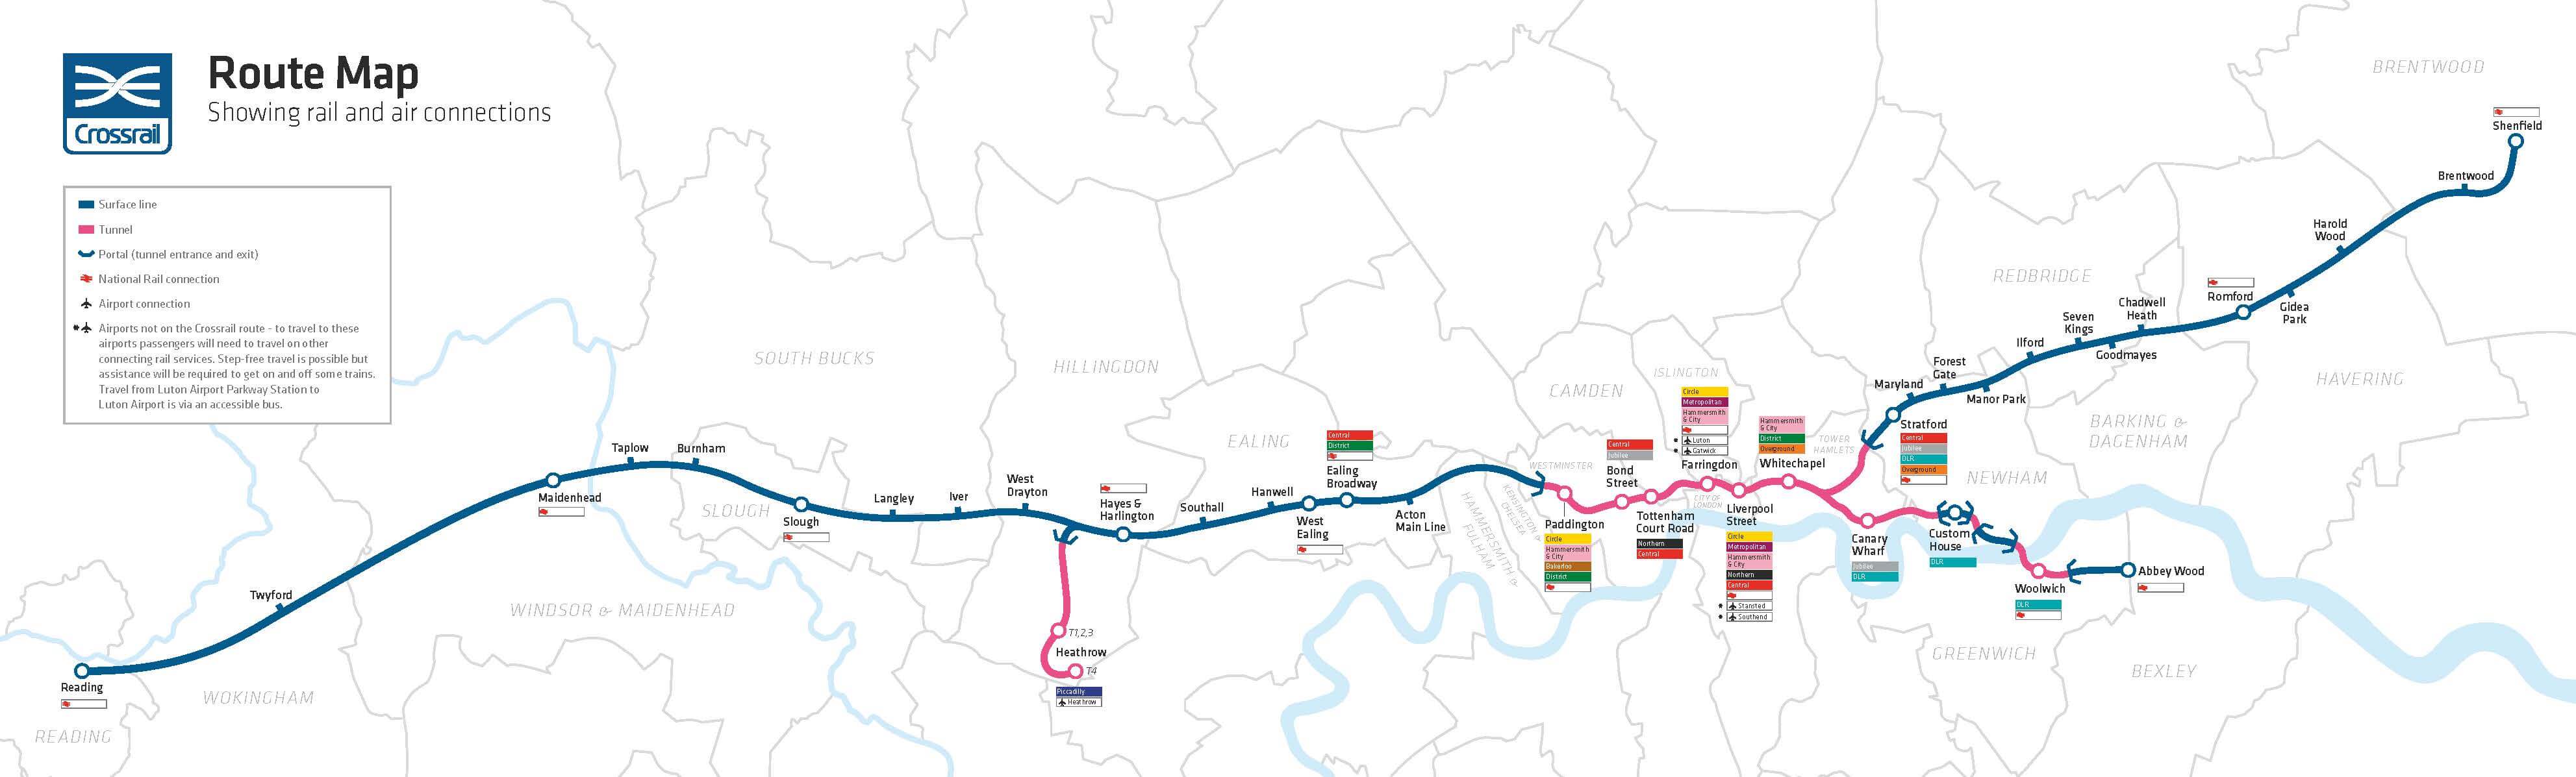 Crossrail route map showing rail and air connections between Reading and Shenfield